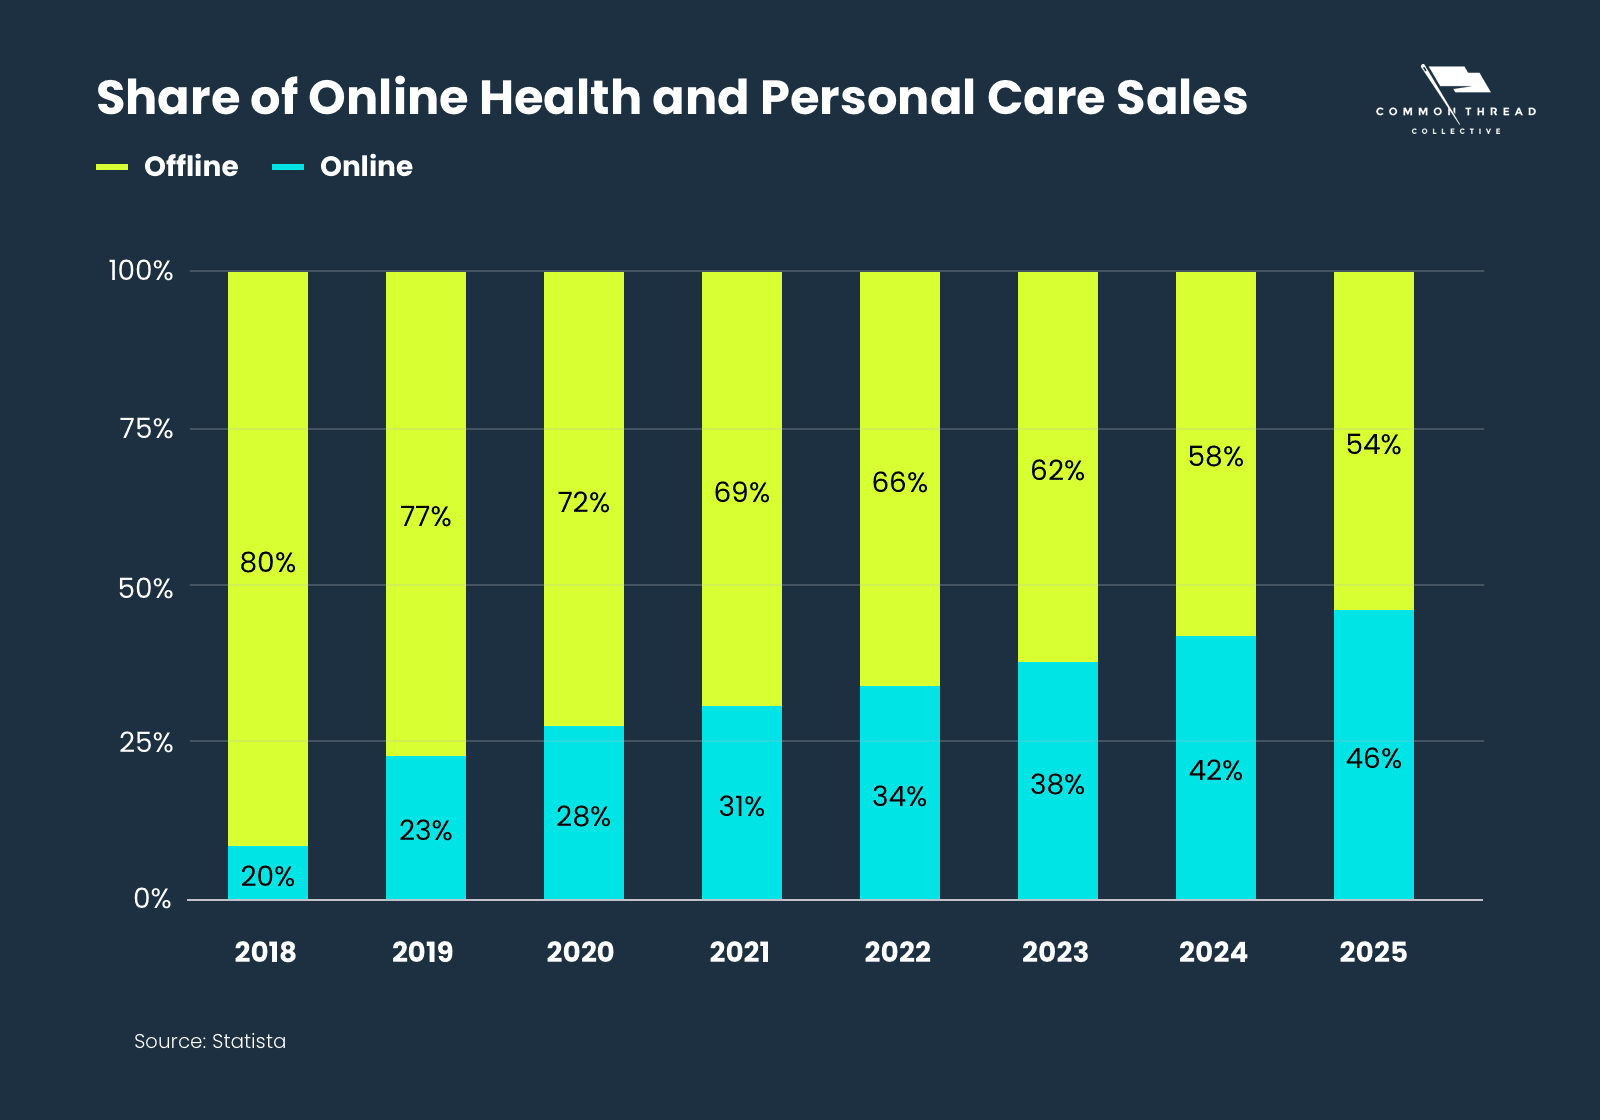 Share of Online Health and Personal Care Sales